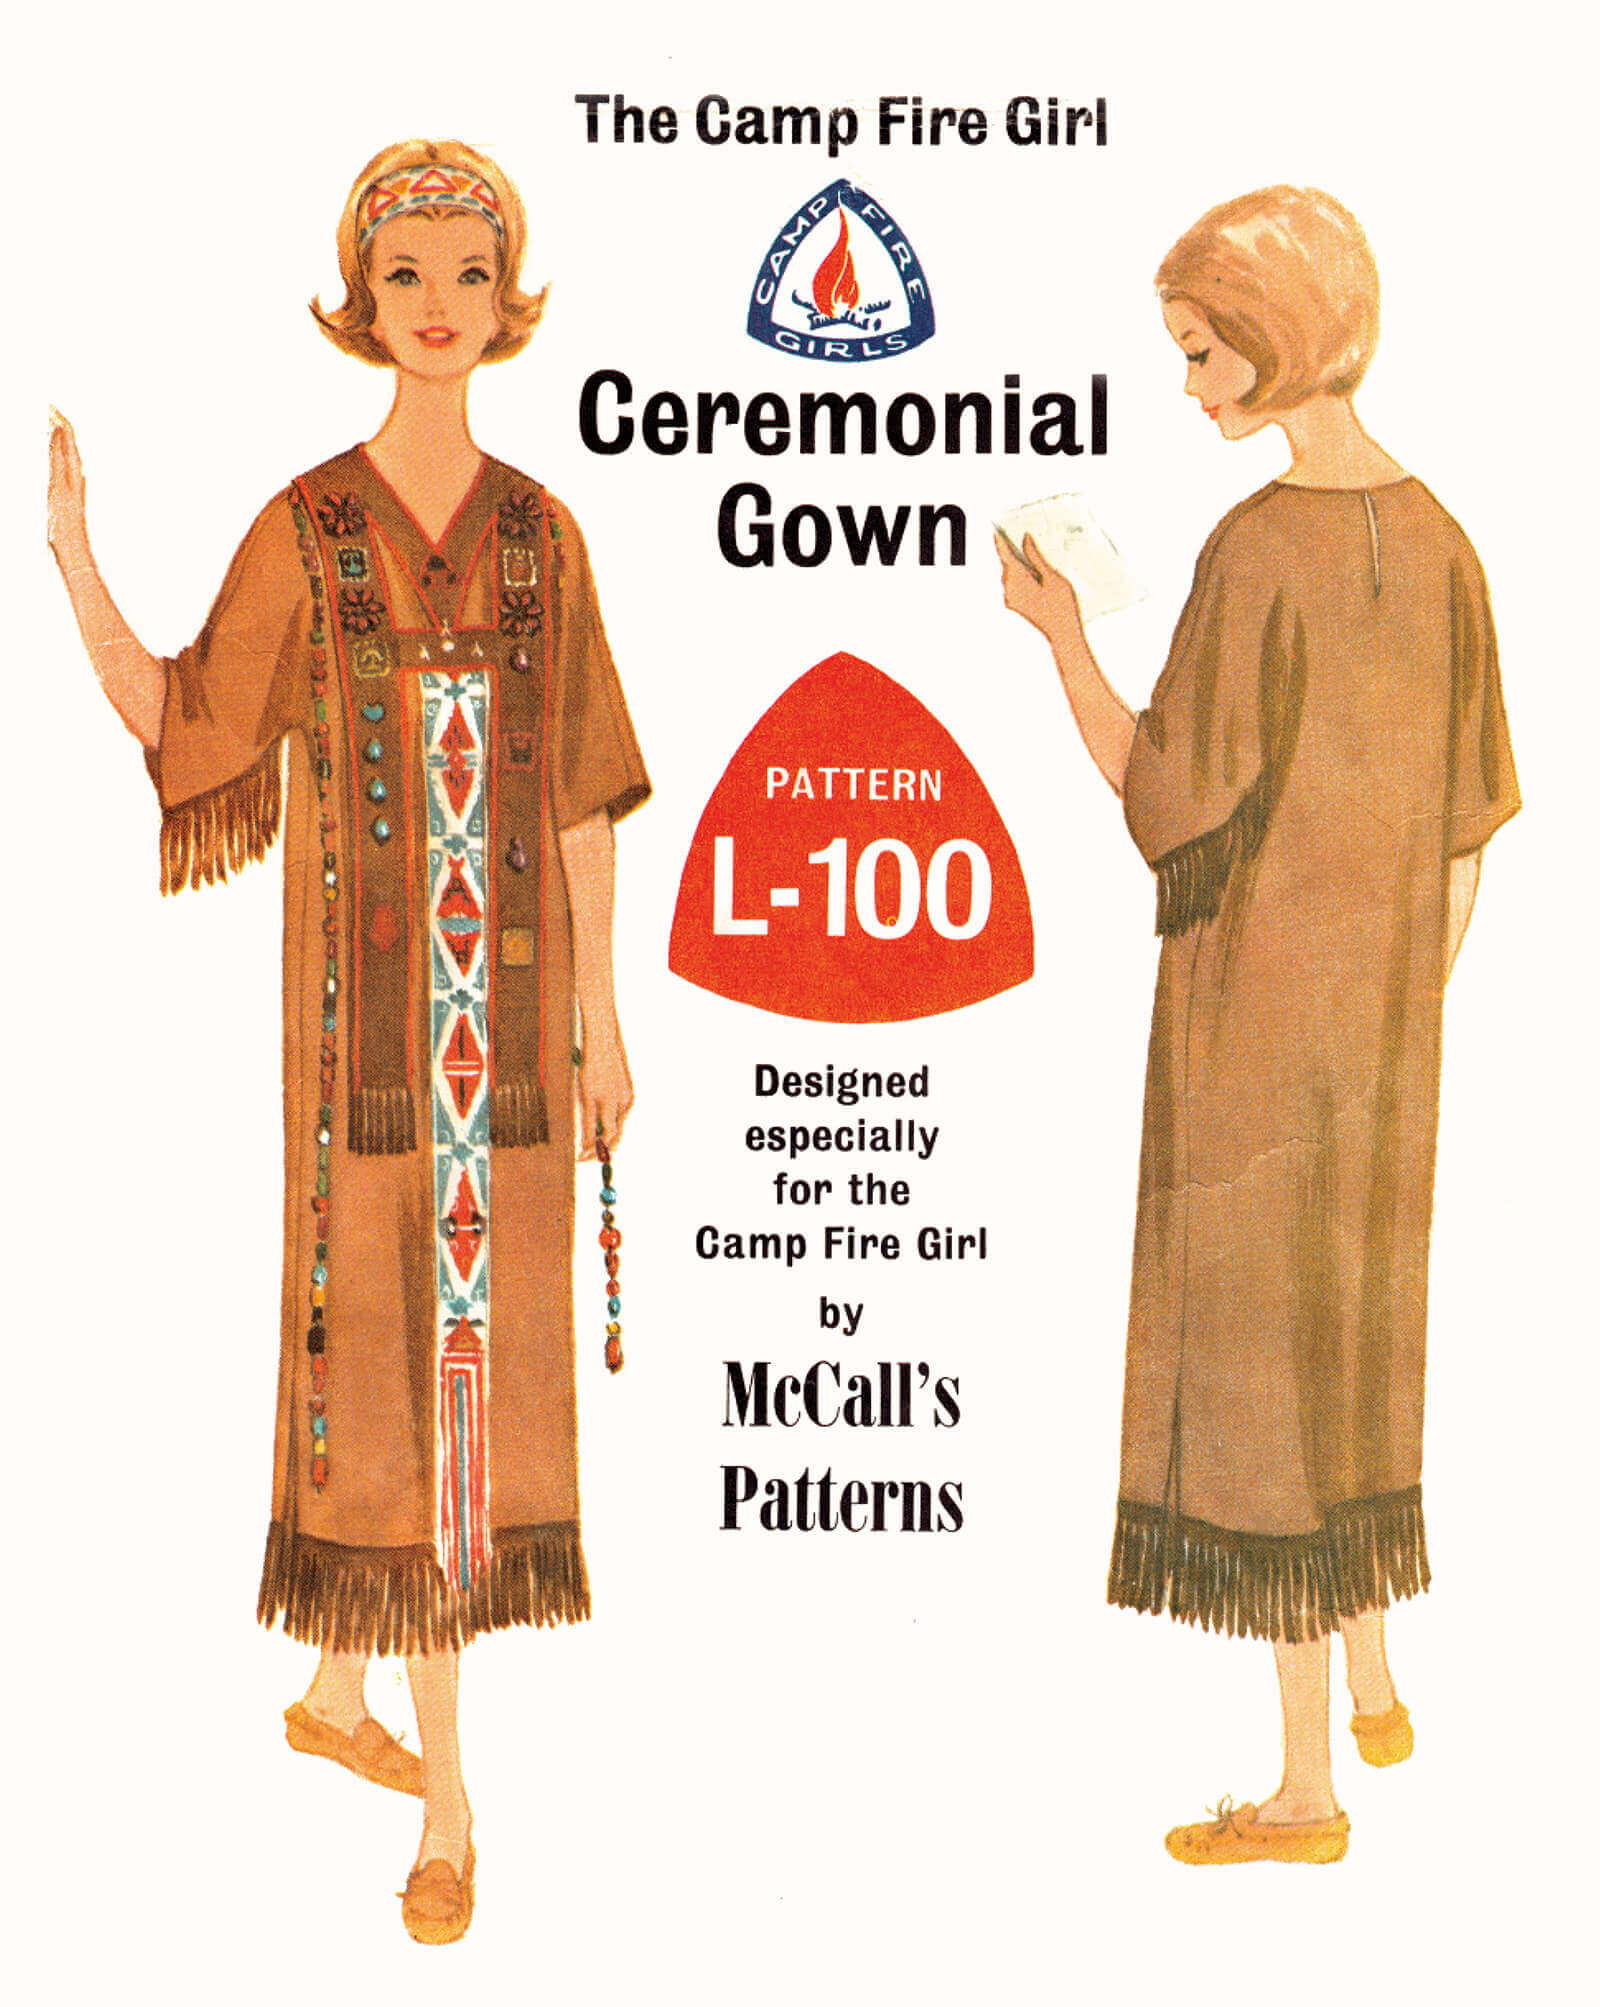 McCall’s pattern for Camp Fire Girl ceremonial gown, mid-1960s. Gulick’s 1915 book The Shul U Tam Na (In Full Dress—With All Beads On) of the Camp Fire Girls had stipulated precise guidelines for the design of the organization’s costumes.